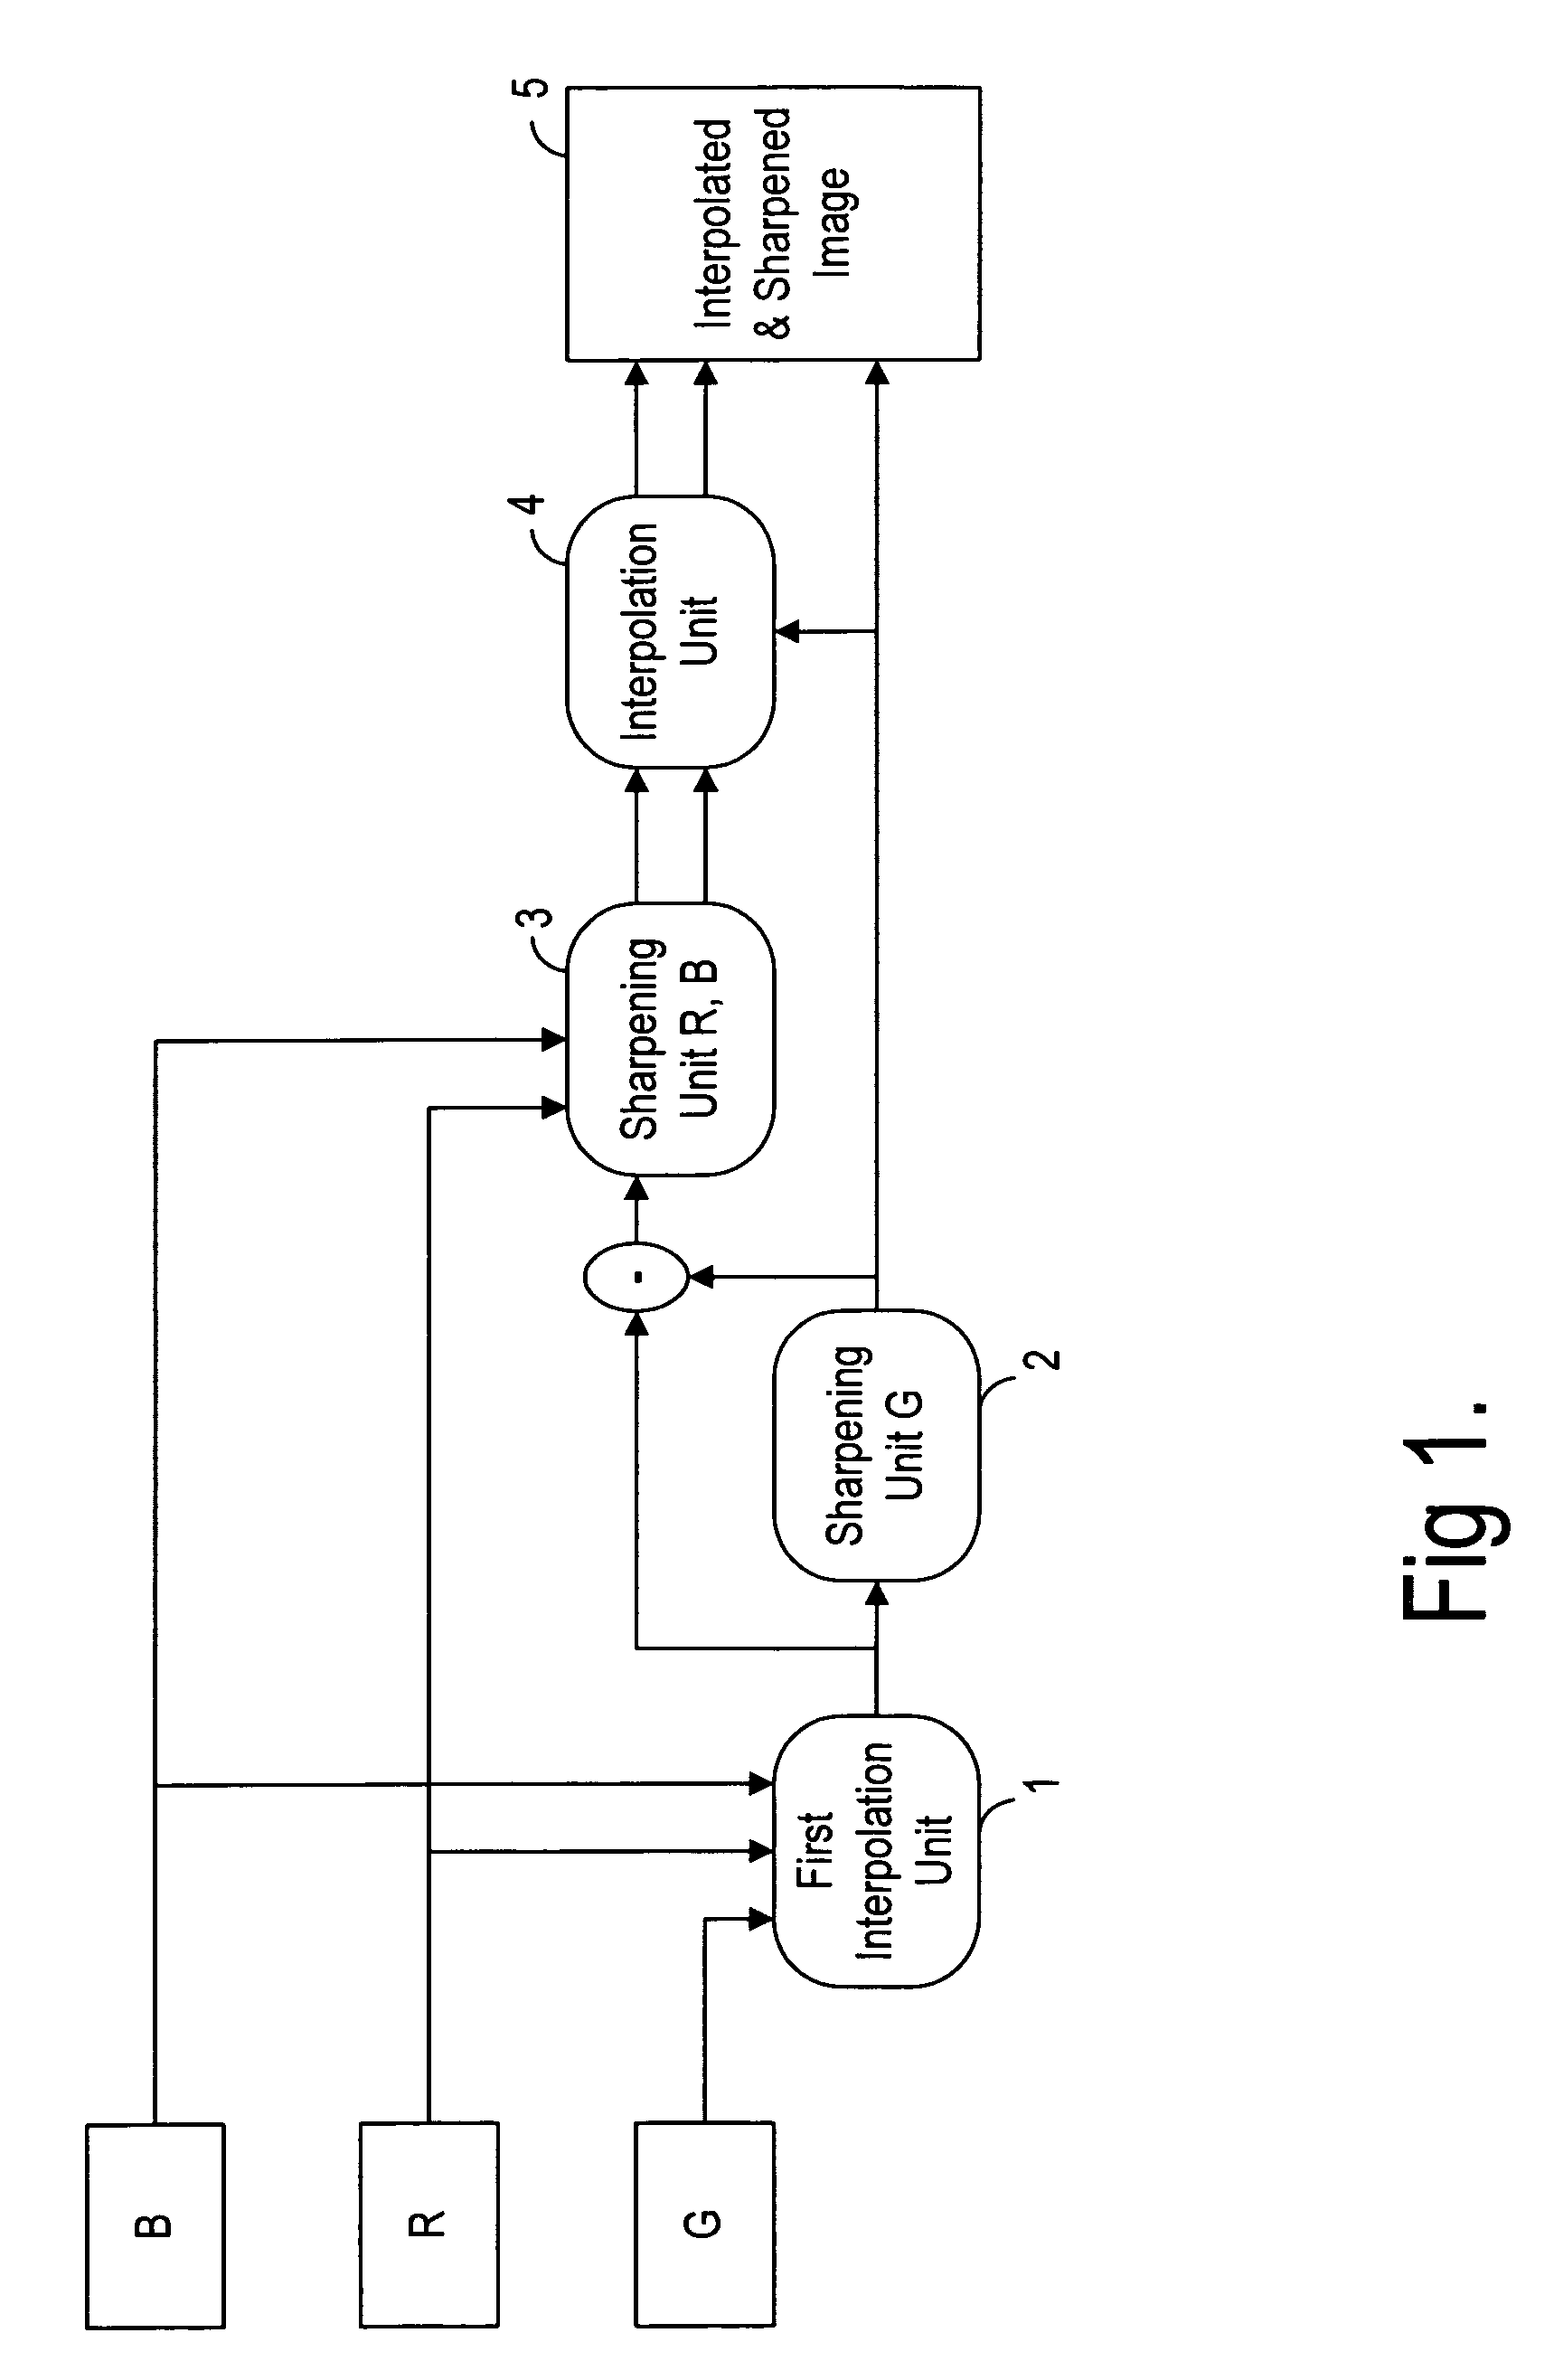 Method for interpolation and sharpening of images